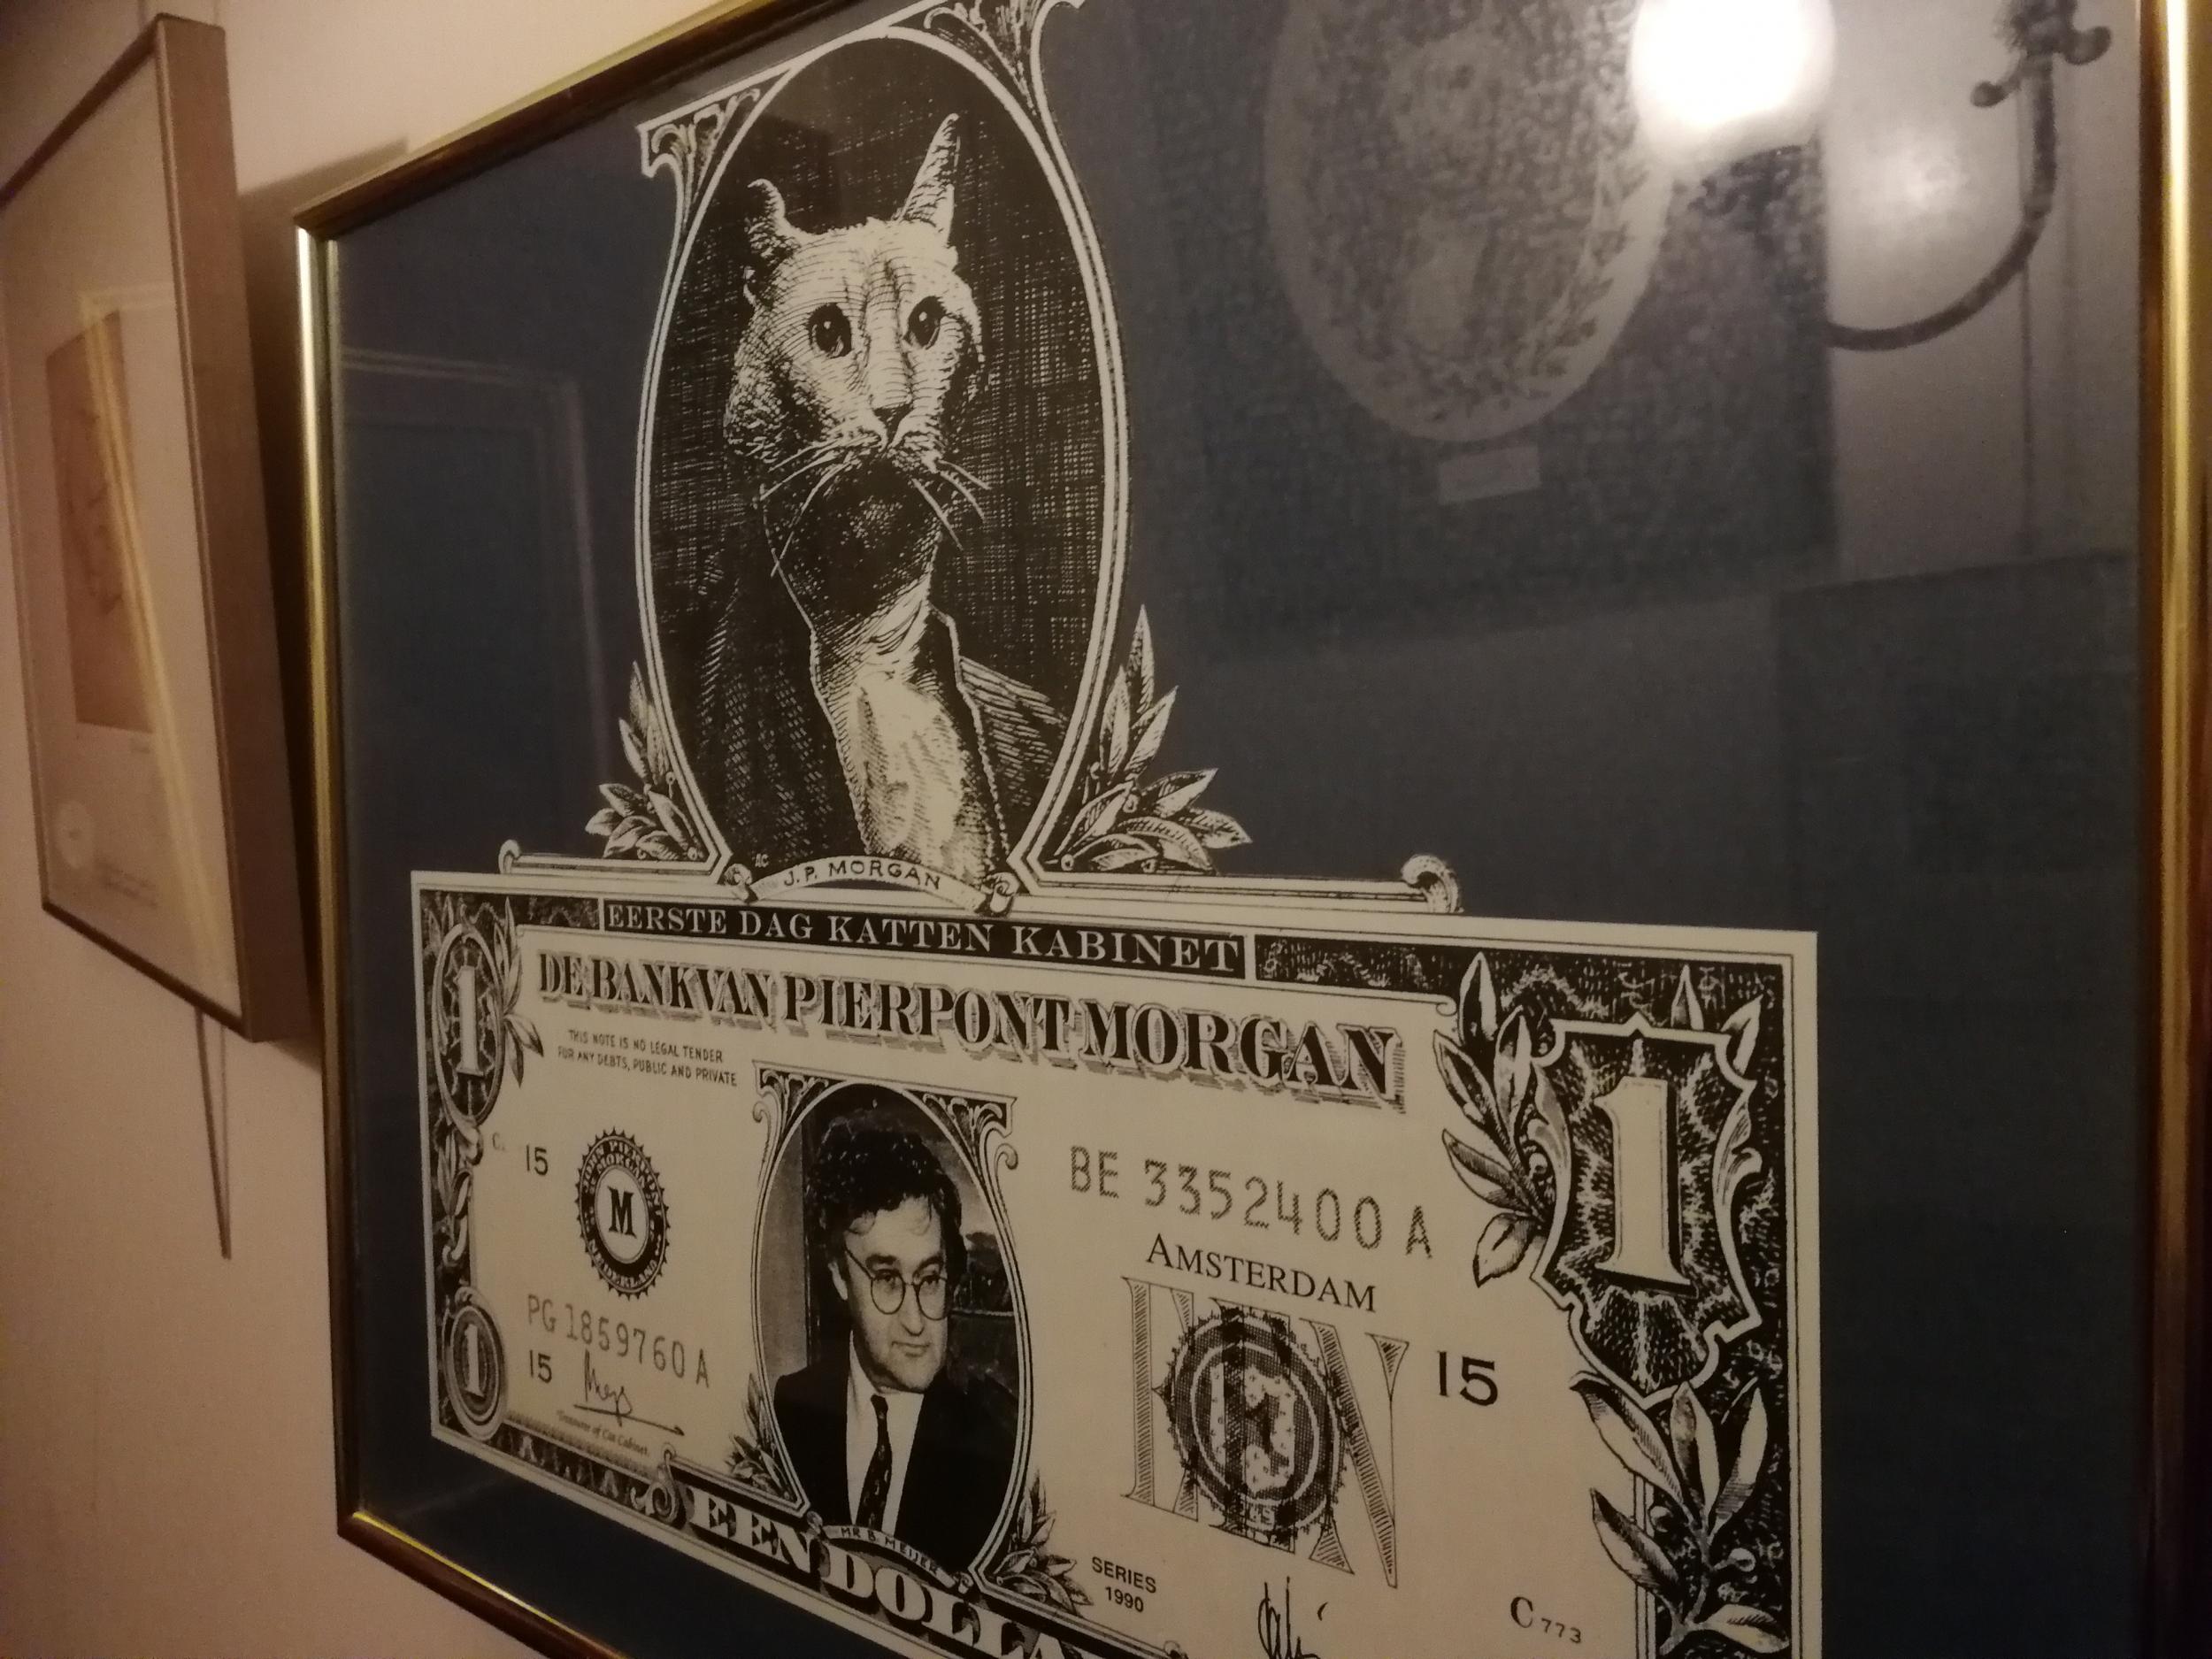 John Pierpont Morgan, the cat who inspired a gallery